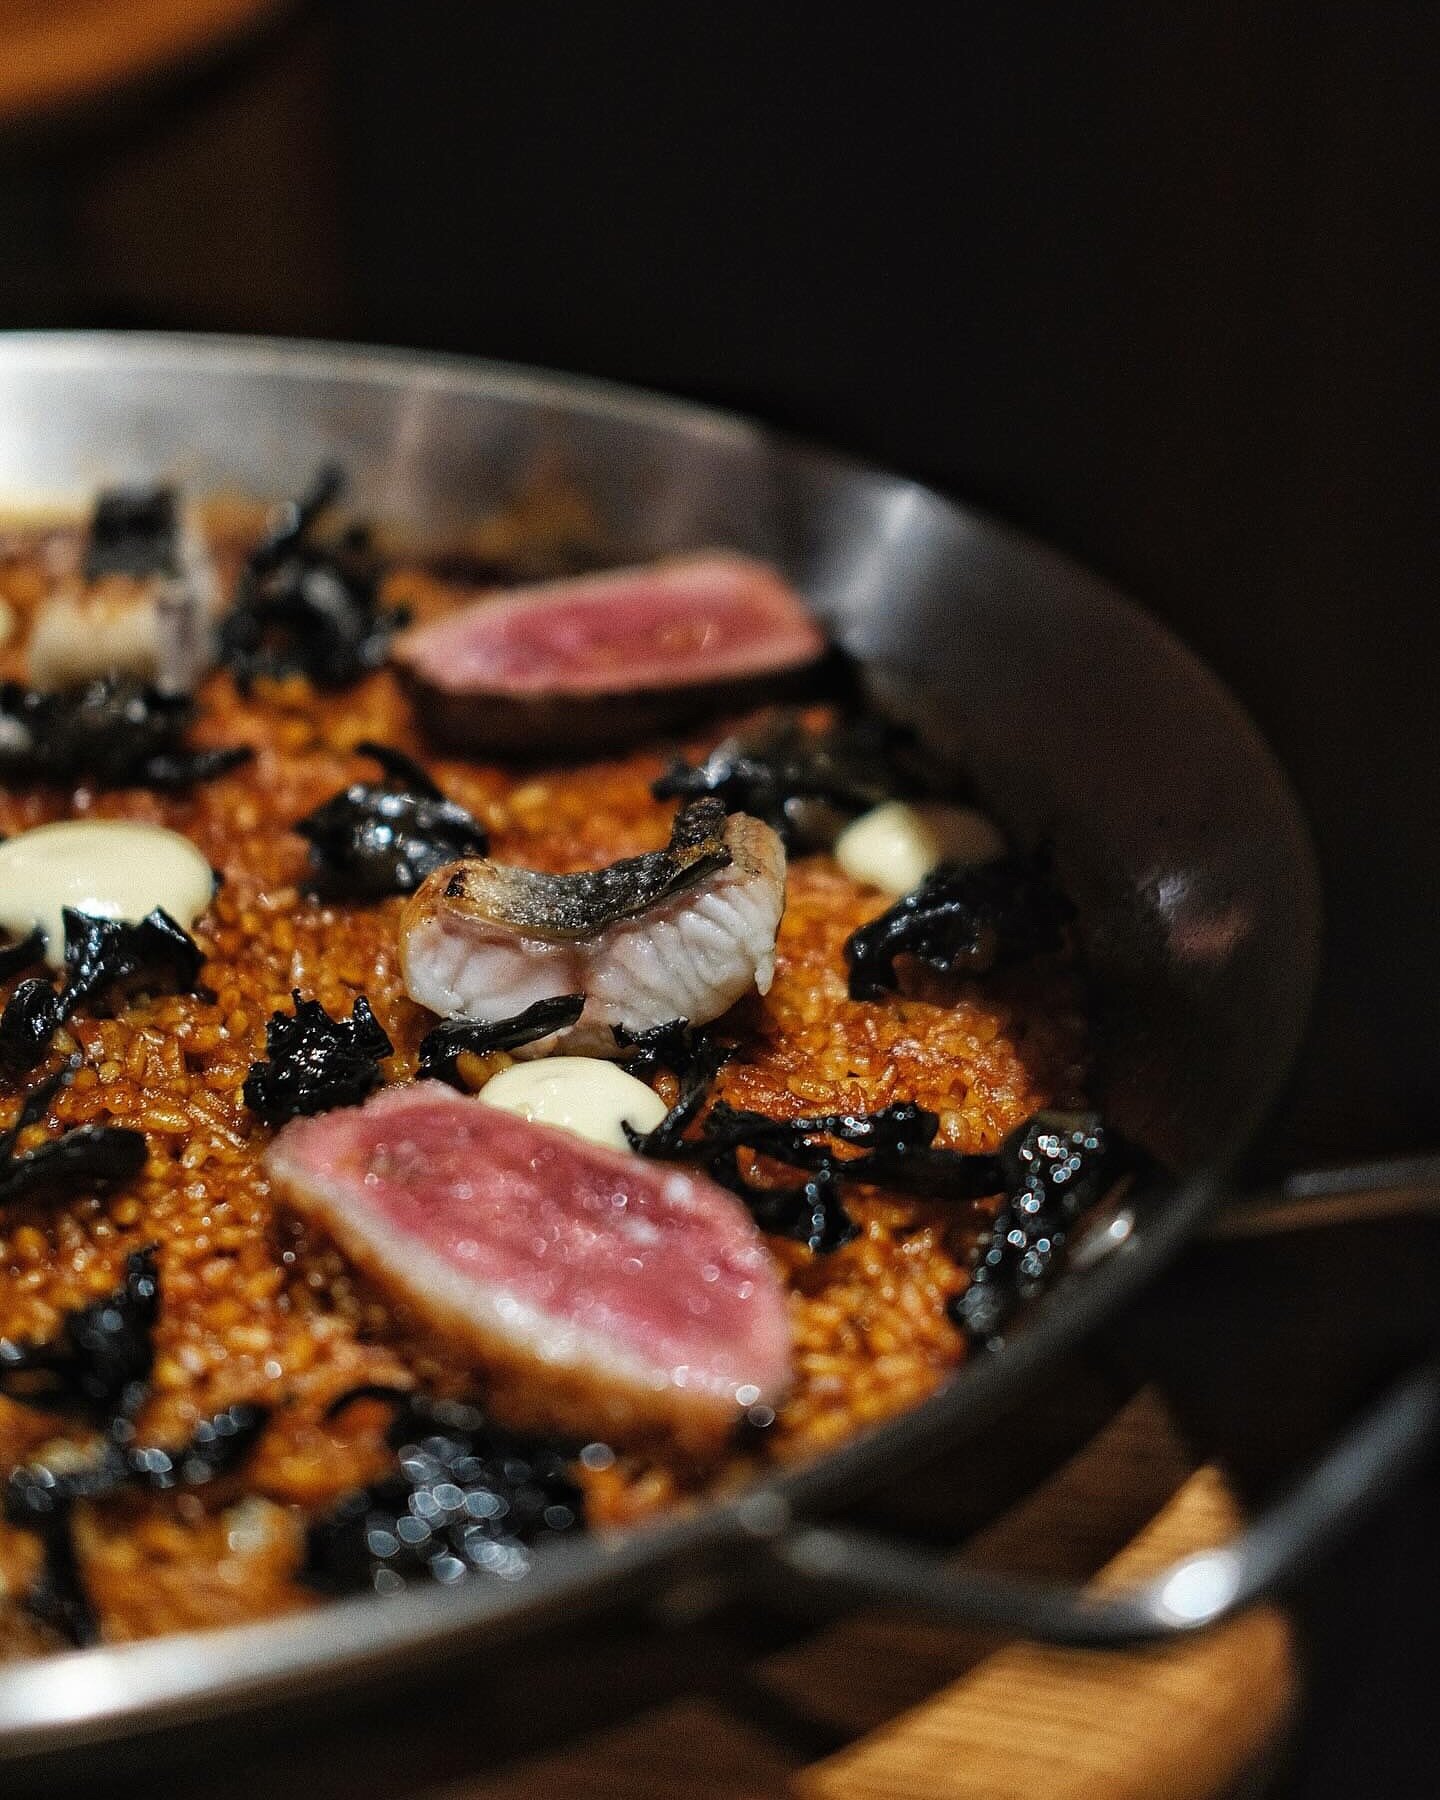 📸💫 Featuring a photo which captures the beauty of our delectable Duck and Eel Paella. It truly speaks volumes, showcasing the succulent Spanish duck breast, the smoky essence of grilled eel, the earthy delight of black trumpet mushrooms, and the fl